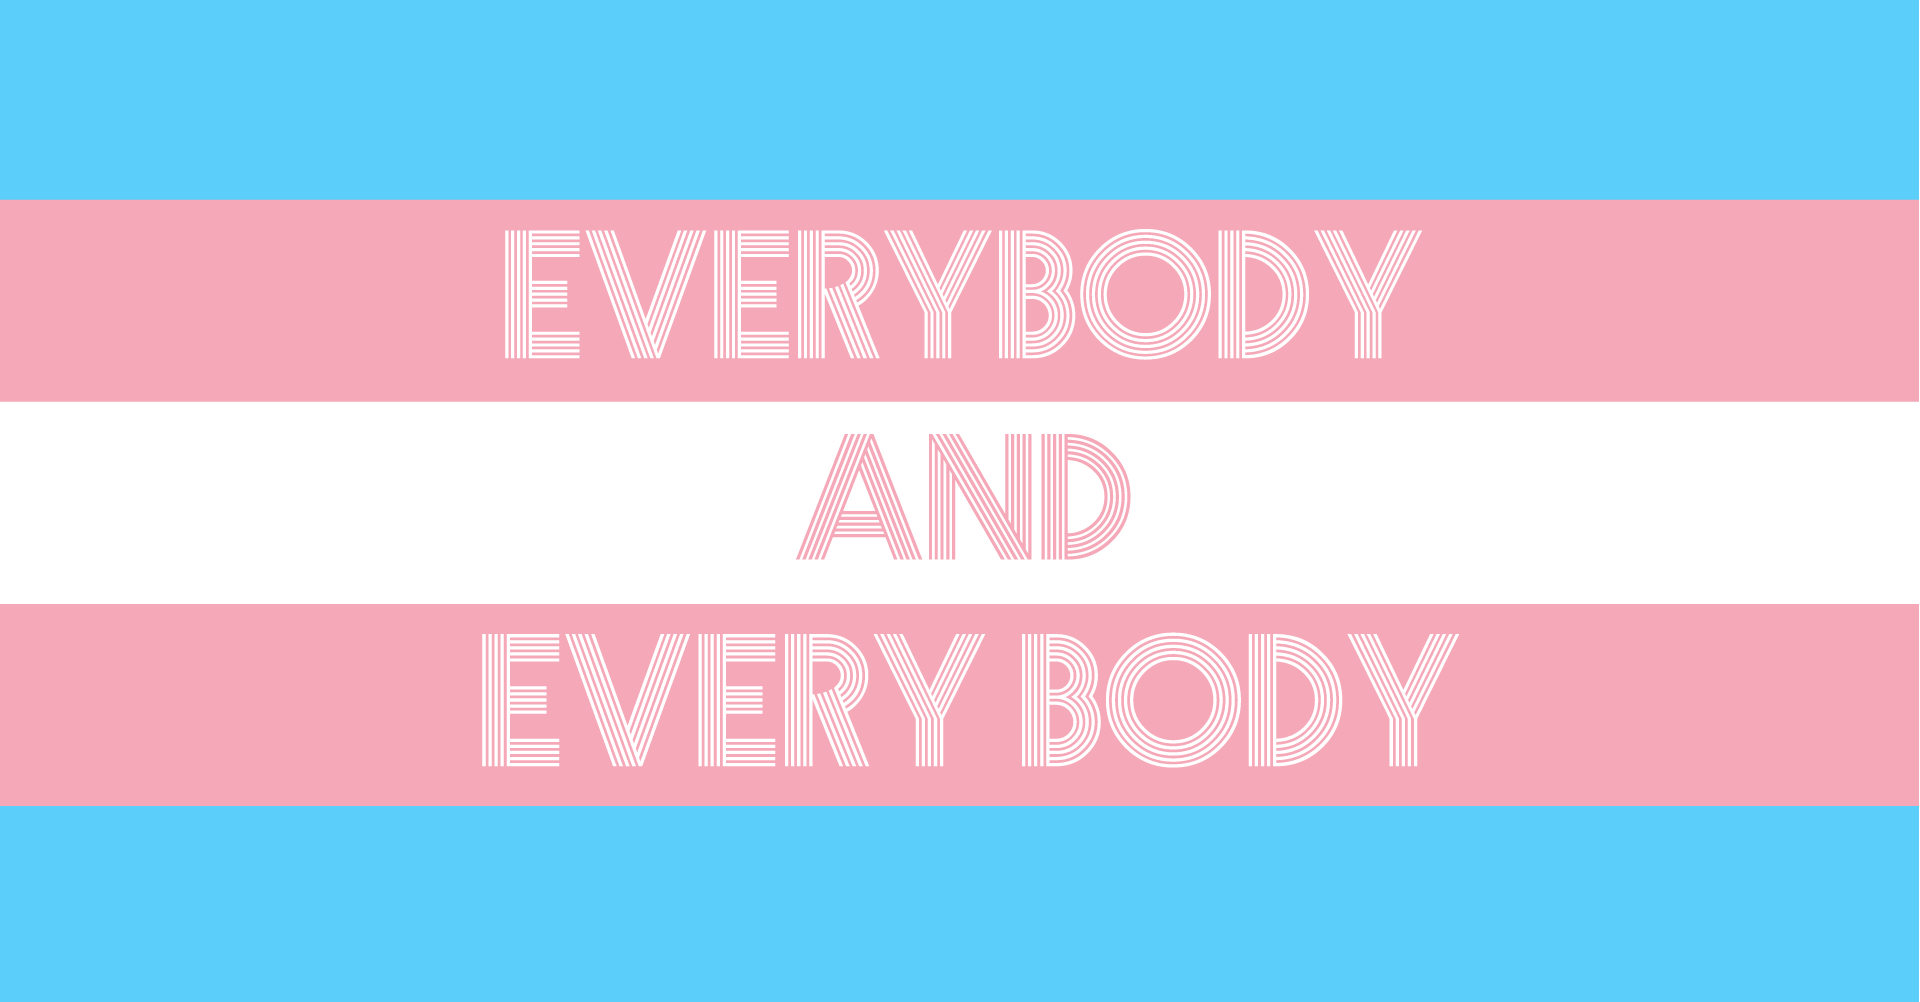 Everybody and every body text on trans flag background